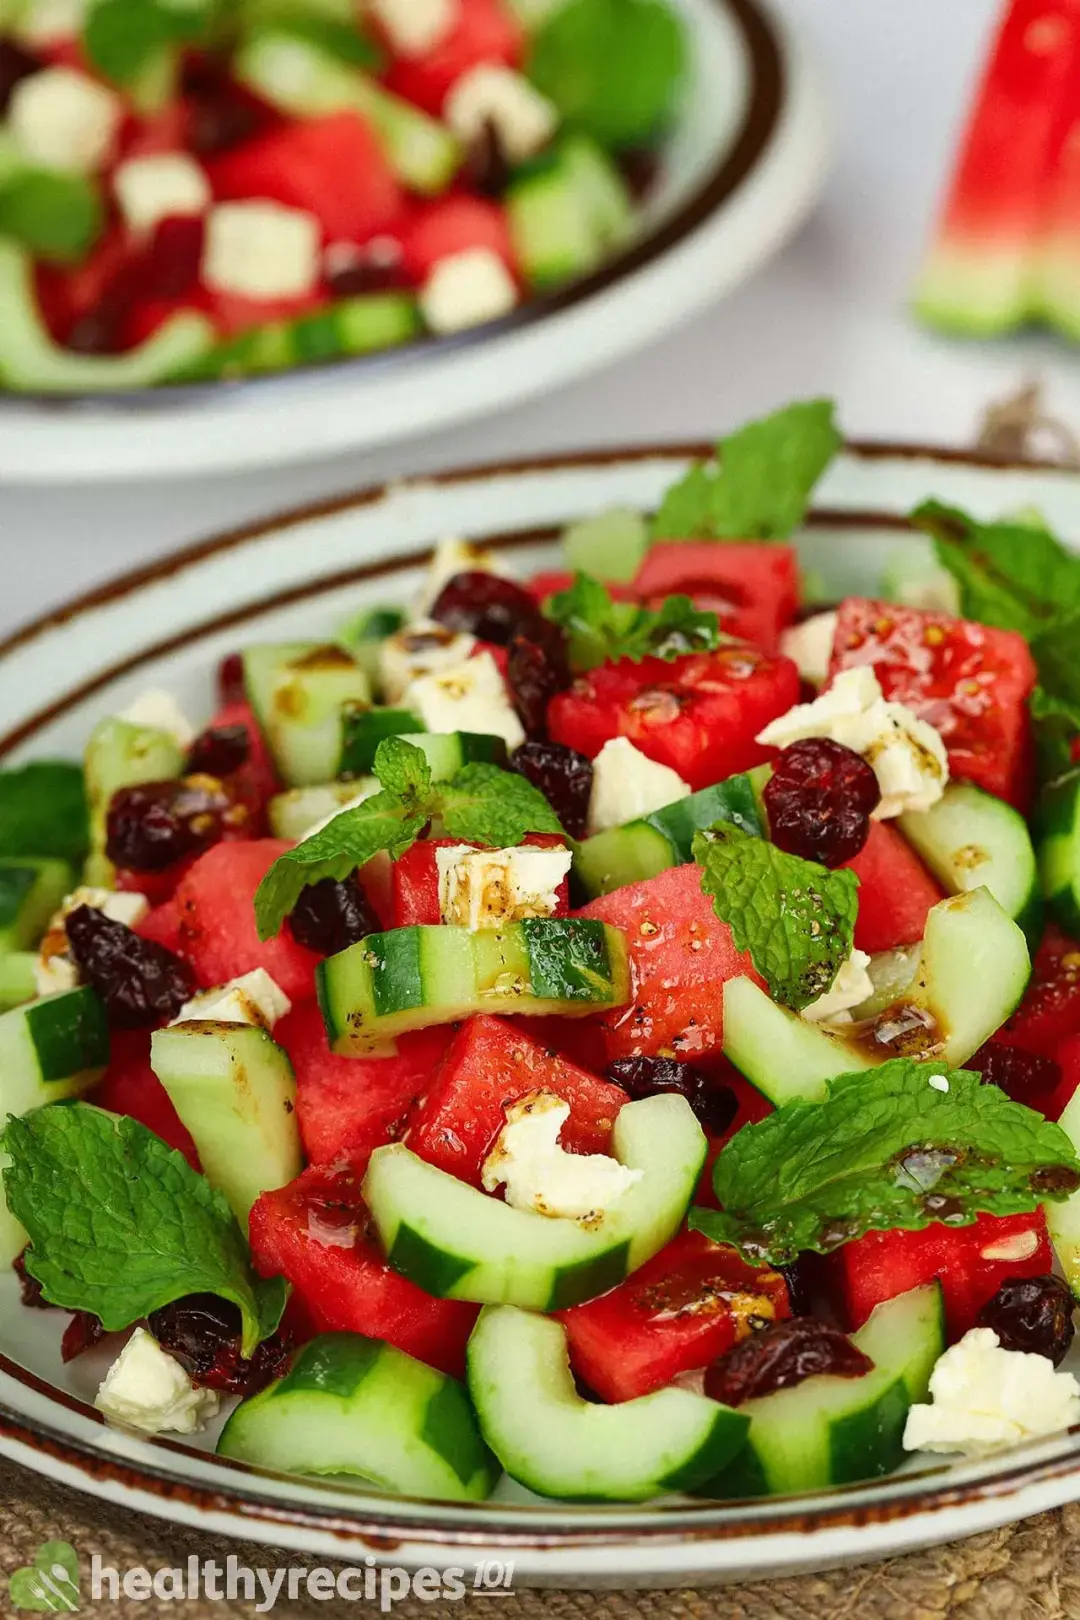 Tips to Make the Best Watermelon Cucumber Salad